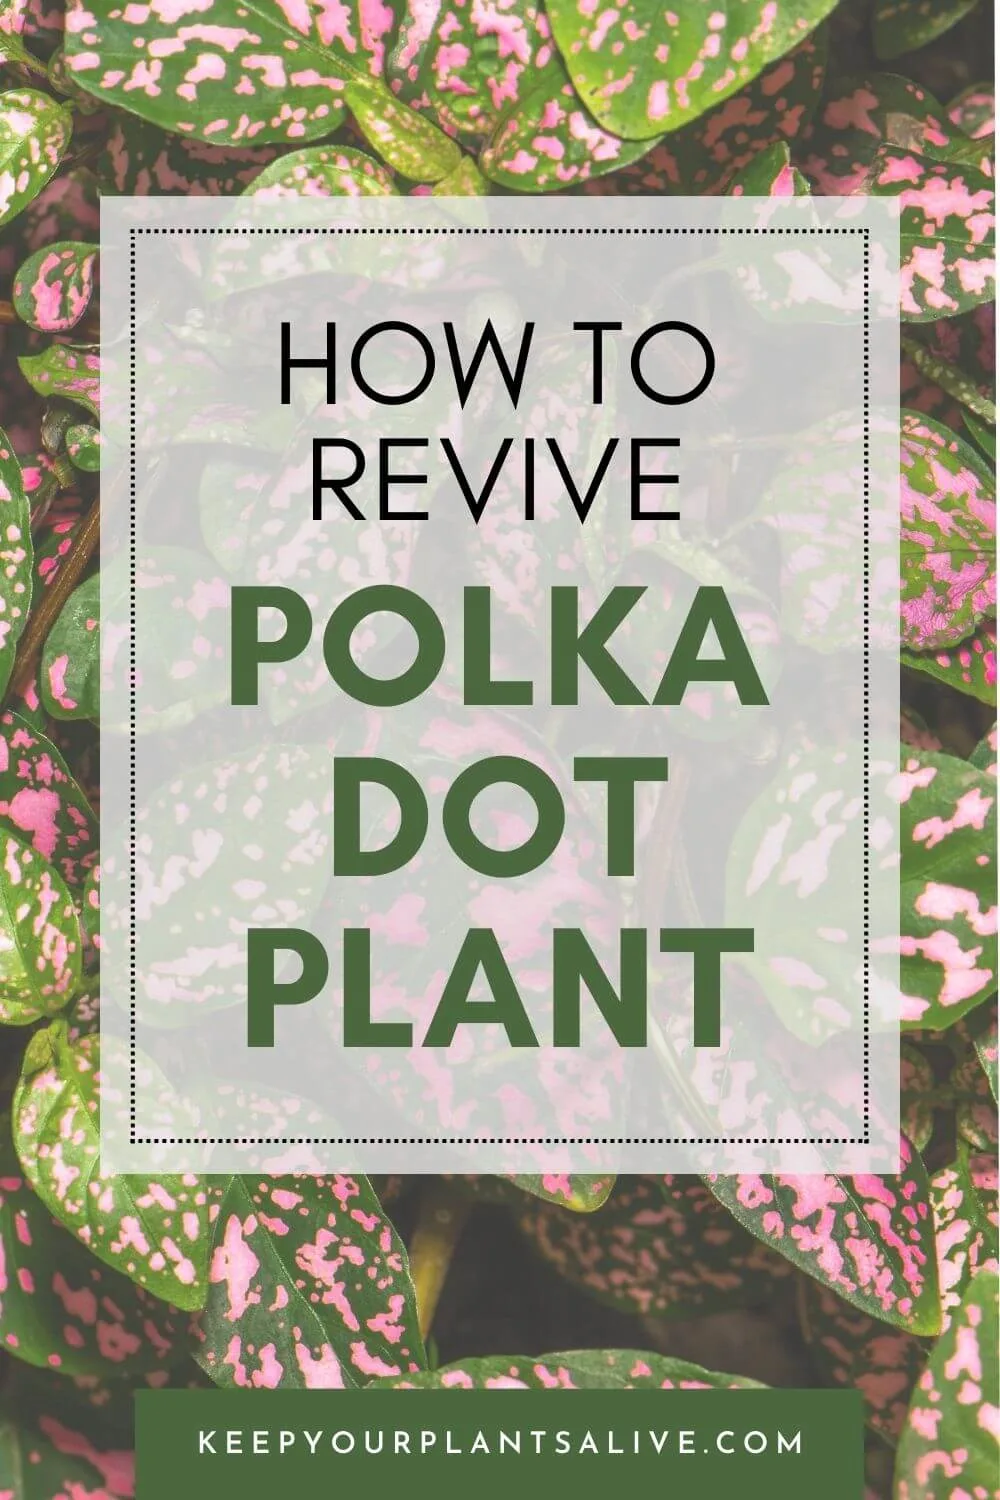 How to revive a polka dot plant?